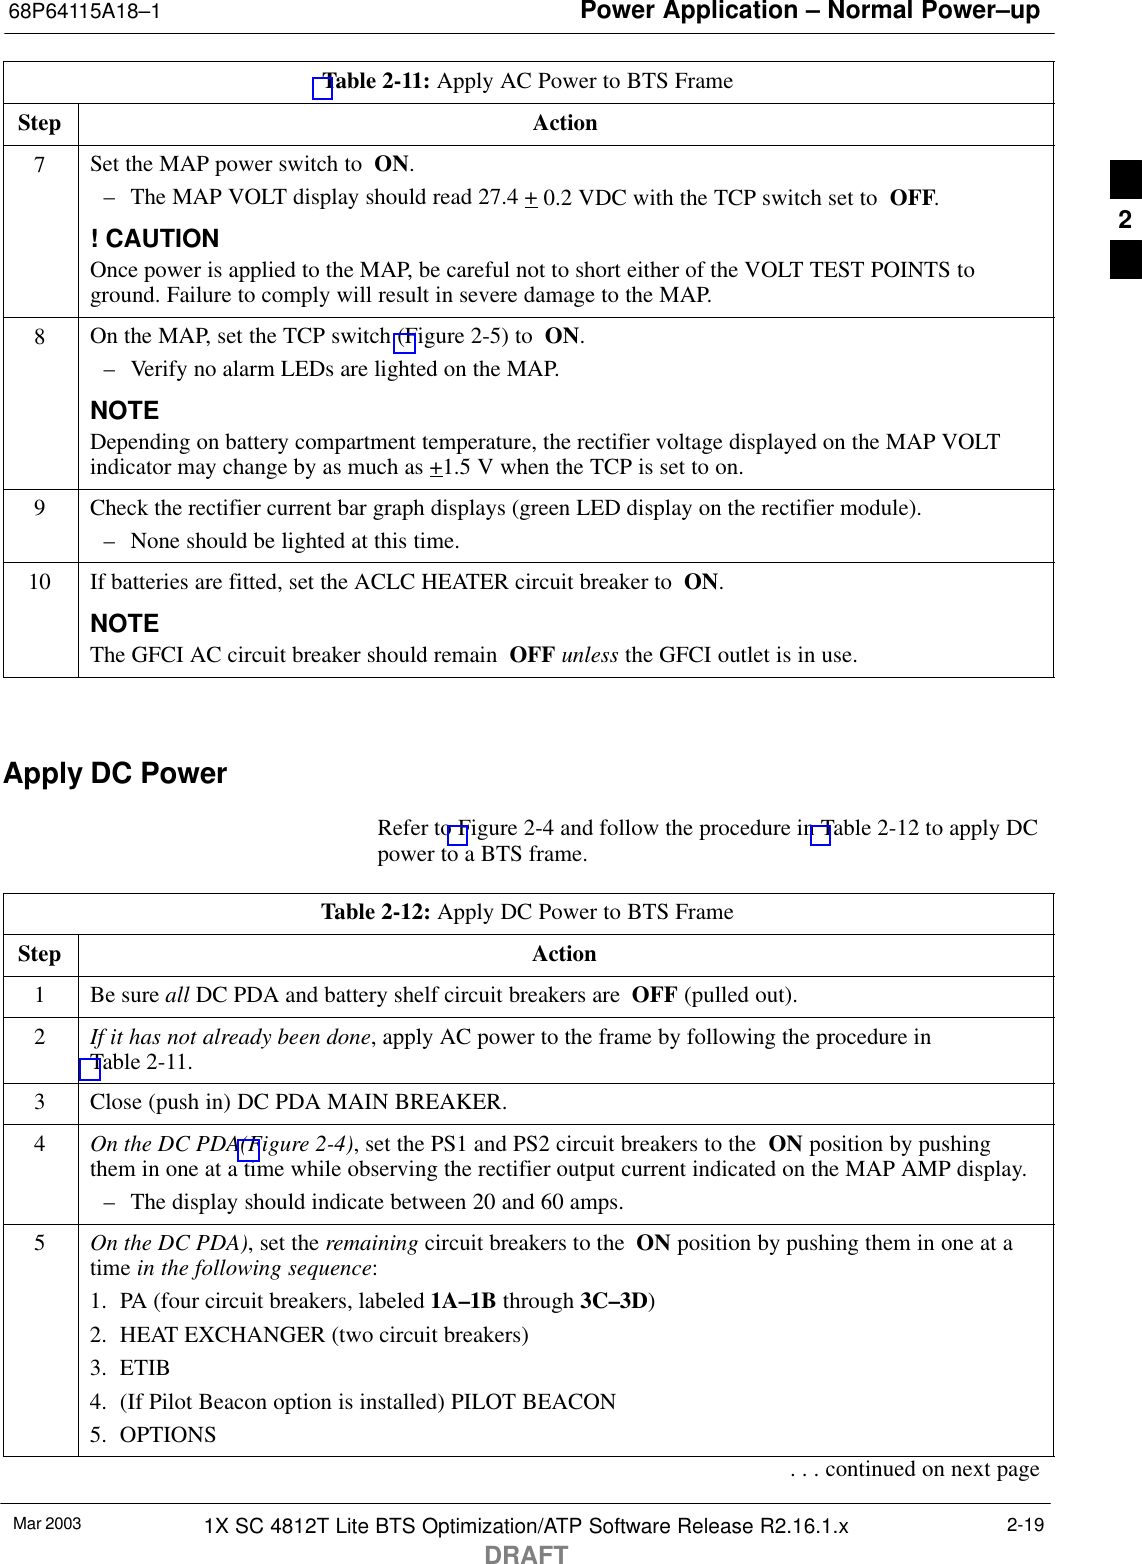 Power Application – Normal Power–up68P64115A18–1Mar 2003 1X SC 4812T Lite BTS Optimization/ATP Software Release R2.16.1.xDRAFT2-19Table 2-11: Apply AC Power to BTS FrameStep Action7Set the MAP power switch to  ON.– The MAP VOLT display should read 27.4 + 0.2 VDC with the TCP switch set to  OFF.! CAUTIONOnce power is applied to the MAP, be careful not to short either of the VOLT TEST POINTS toground. Failure to comply will result in severe damage to the MAP.8On the MAP, set the TCP switch (Figure 2-5) to  ON.– Verify no alarm LEDs are lighted on the MAP.NOTEDepending on battery compartment temperature, the rectifier voltage displayed on the MAP VOLTindicator may change by as much as +1.5 V when the TCP is set to on.9Check the rectifier current bar graph displays (green LED display on the rectifier module).– None should be lighted at this time.10 If batteries are fitted, set the ACLC HEATER circuit breaker to  ON.NOTEThe GFCI AC circuit breaker should remain  OFF unless the GFCI outlet is in use. Apply DC PowerRefer to Figure 2-4 and follow the procedure in Table 2-12 to apply DCpower to a BTS frame.Table 2-12: Apply DC Power to BTS FrameStep Action1Be sure all DC PDA and battery shelf circuit breakers are  OFF (pulled out).2If it has not already been done, apply AC power to the frame by following the procedure inTable 2-11.3Close (push in) DC PDA MAIN BREAKER.4On the DC PDA(Figure 2-4), set the PS1 and PS2 circuit breakers to the  ON position by pushingthem in one at a time while observing the rectifier output current indicated on the MAP AMP display.– The display should indicate between 20 and 60 amps.5On the DC PDA), set the remaining circuit breakers to the  ON position by pushing them in one at atime in the following sequence:1. PA (four circuit breakers, labeled 1A–1B through 3C–3D)2. HEAT EXCHANGER (two circuit breakers)3. ETIB4. (If Pilot Beacon option is installed) PILOT BEACON5. OPTIONS. . . continued on next page2